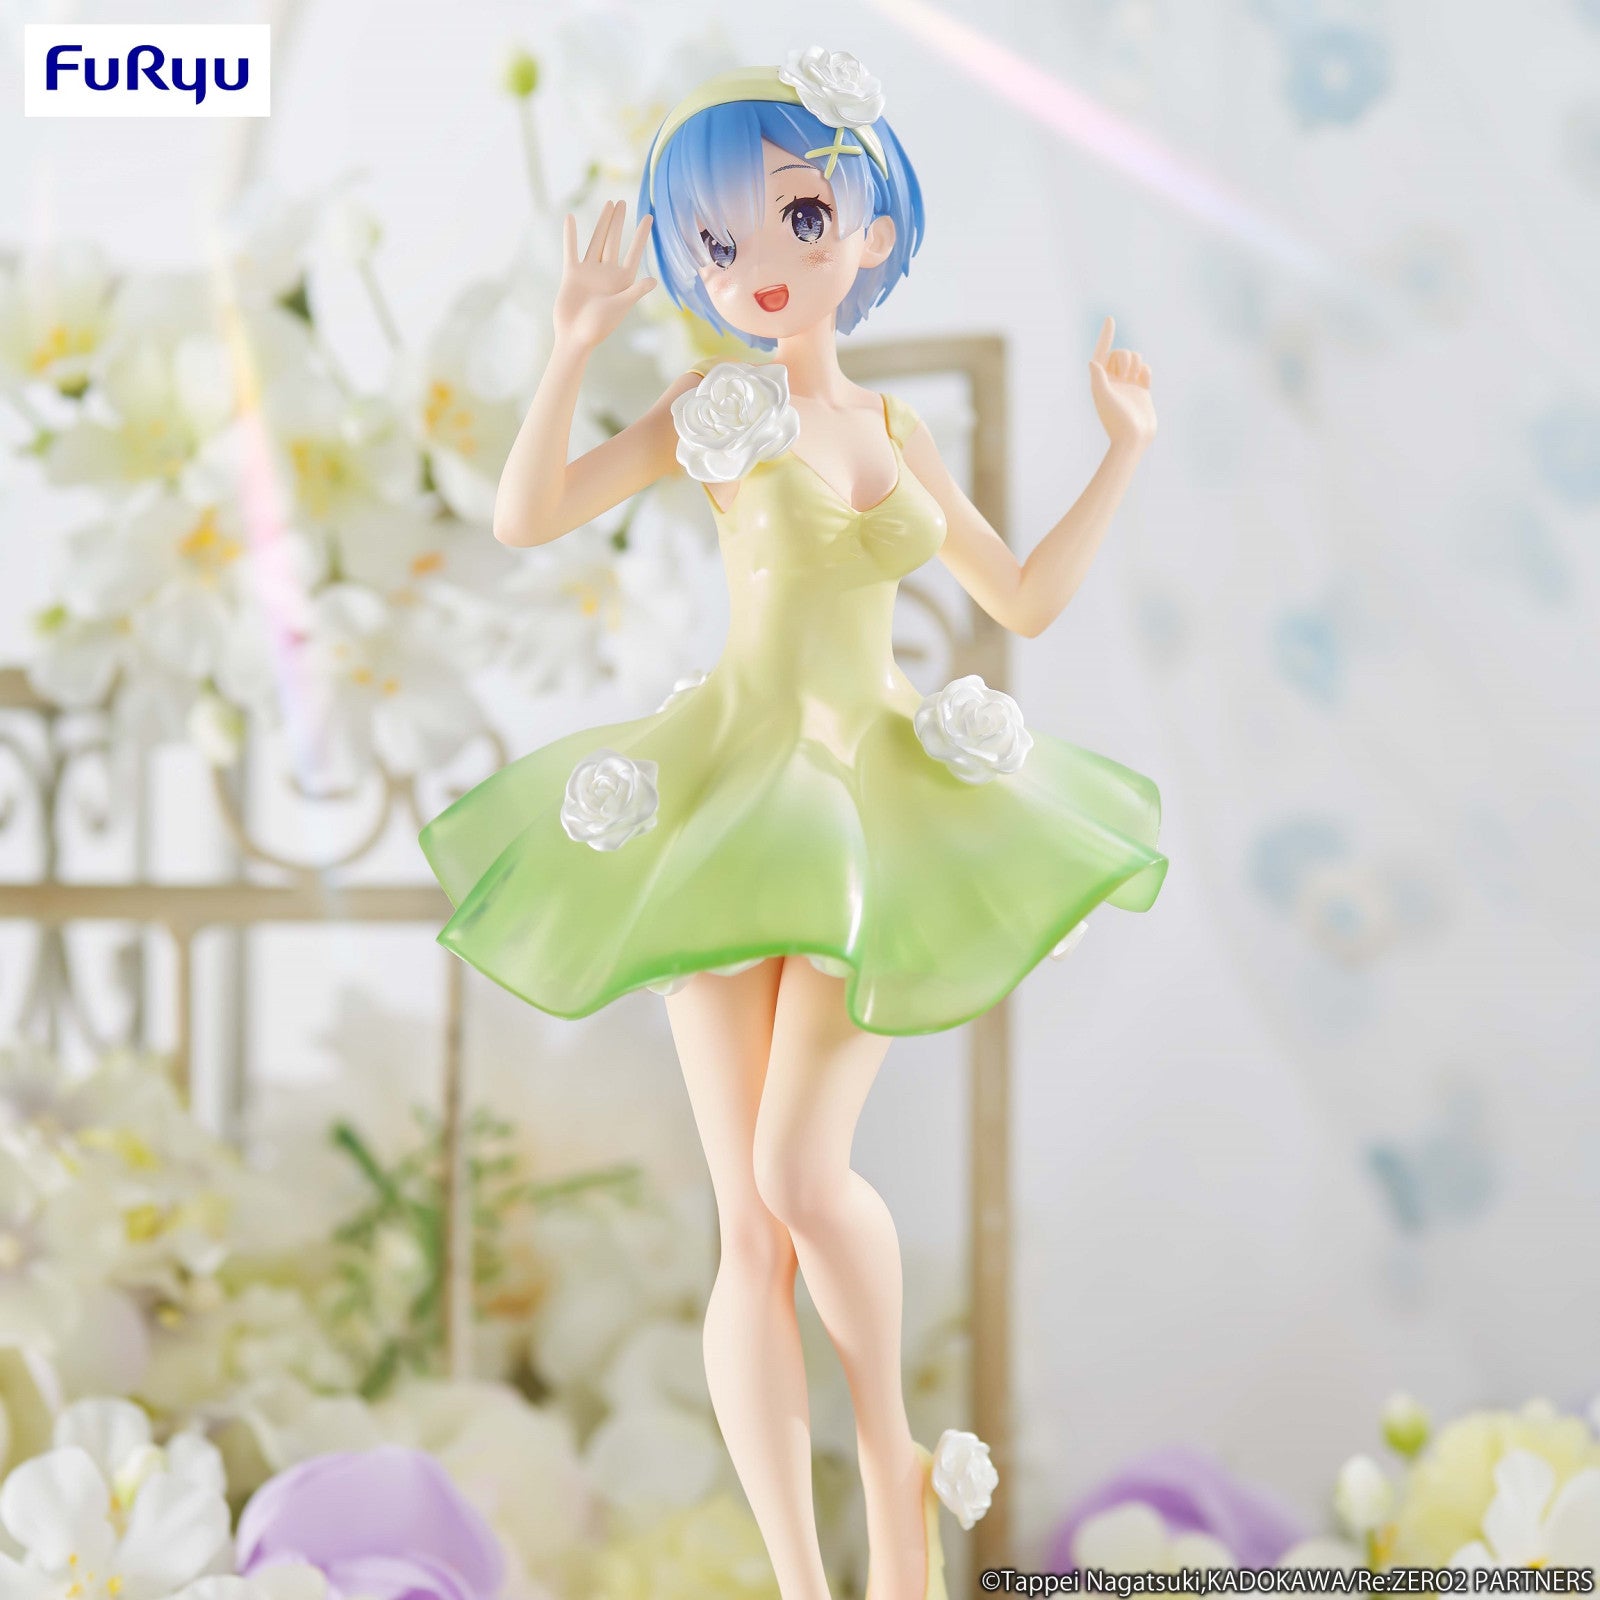 Re:ZERO Starting Life in Another World: TRIO TRY IT FIGURE - Rem (Flower Dress Ver)